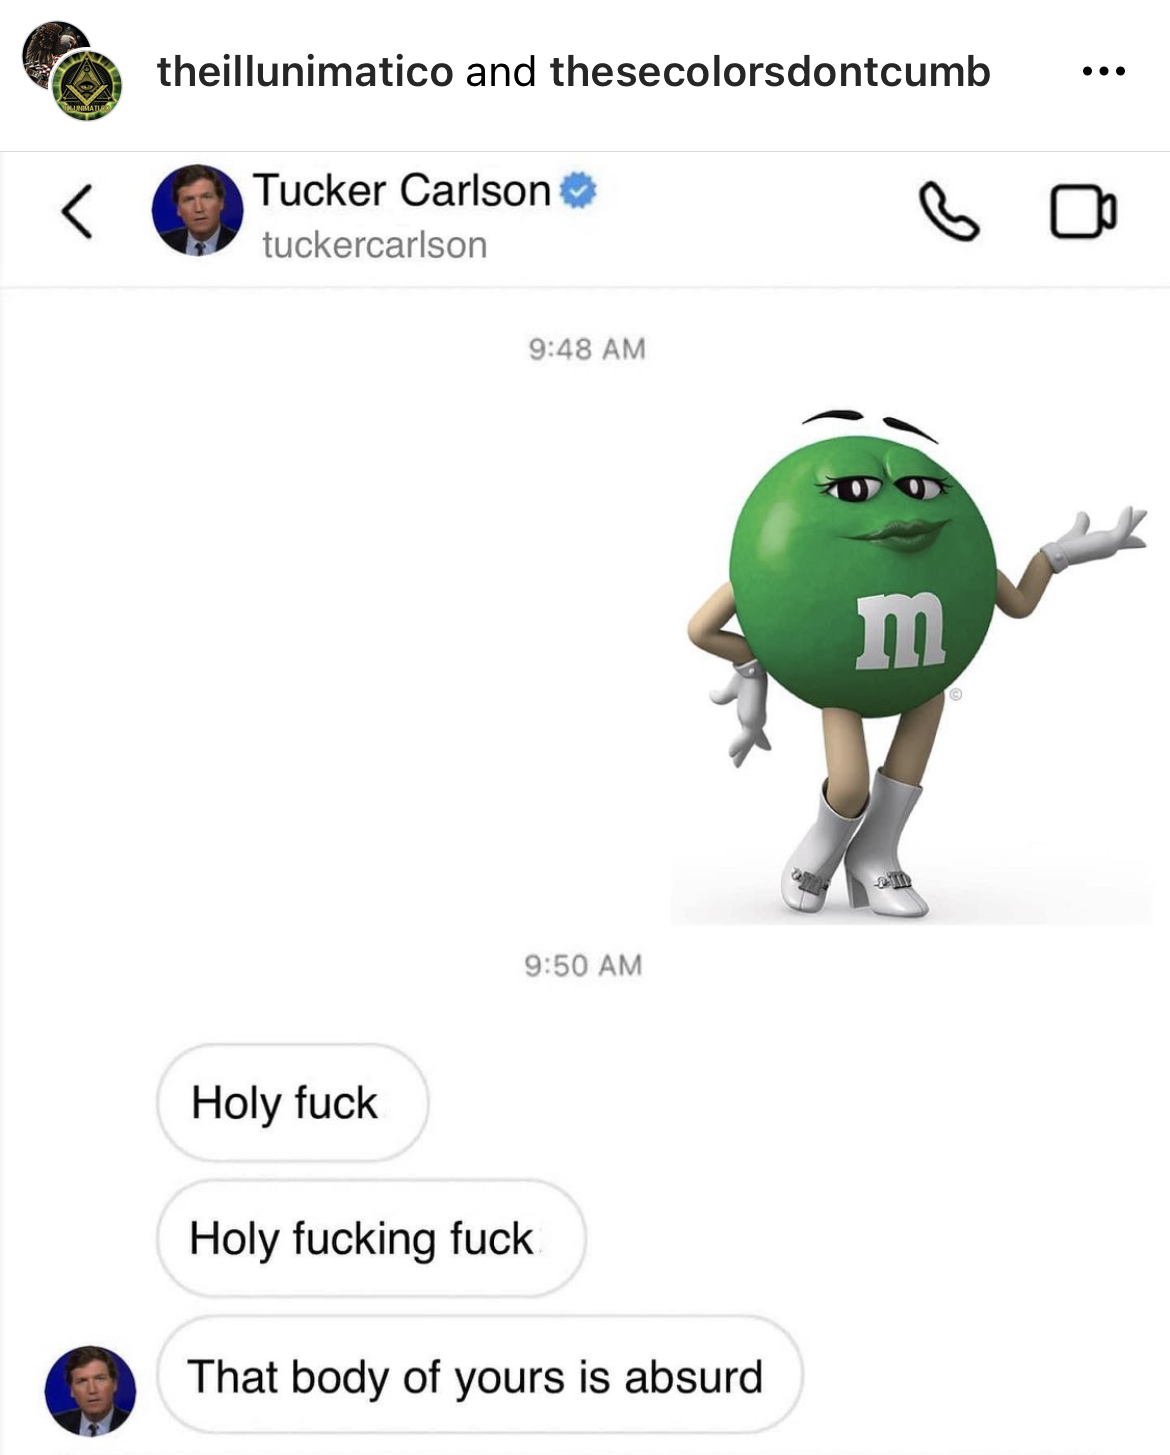 Adam Levine Sexting memes - green m&m uk - Allematic theillunimatico and thesecolorsdontcumb Tucker Carlson tuckercarlson Holy fuck Holy fucking fuck That body of yours is absurd m